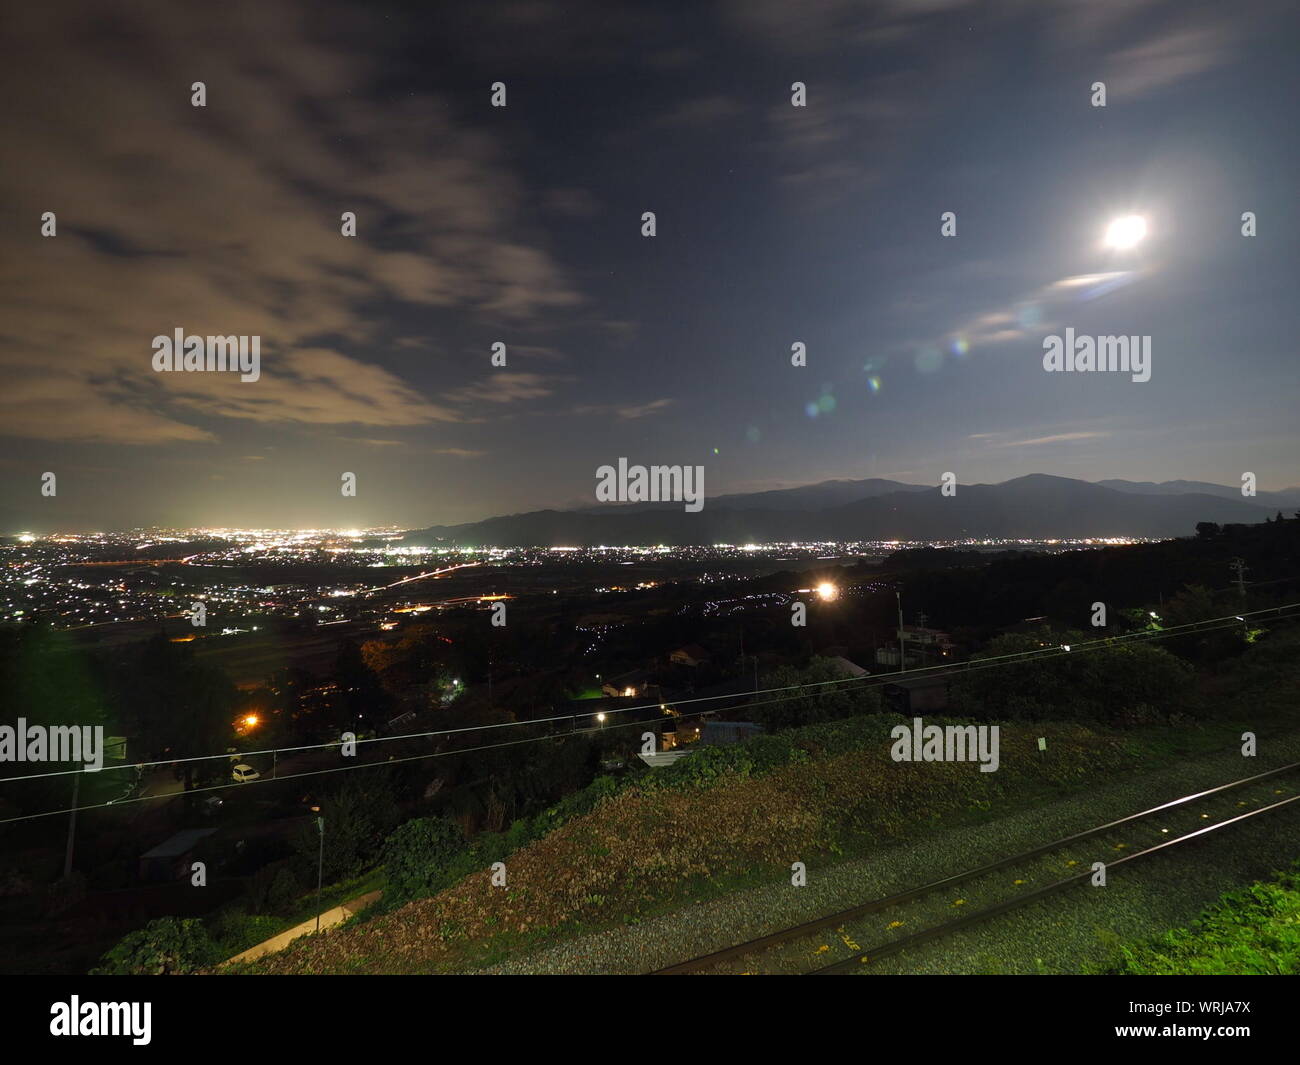 Scenic View Of Illuminated City With Railroad Tracks Against Sky Stock Photo